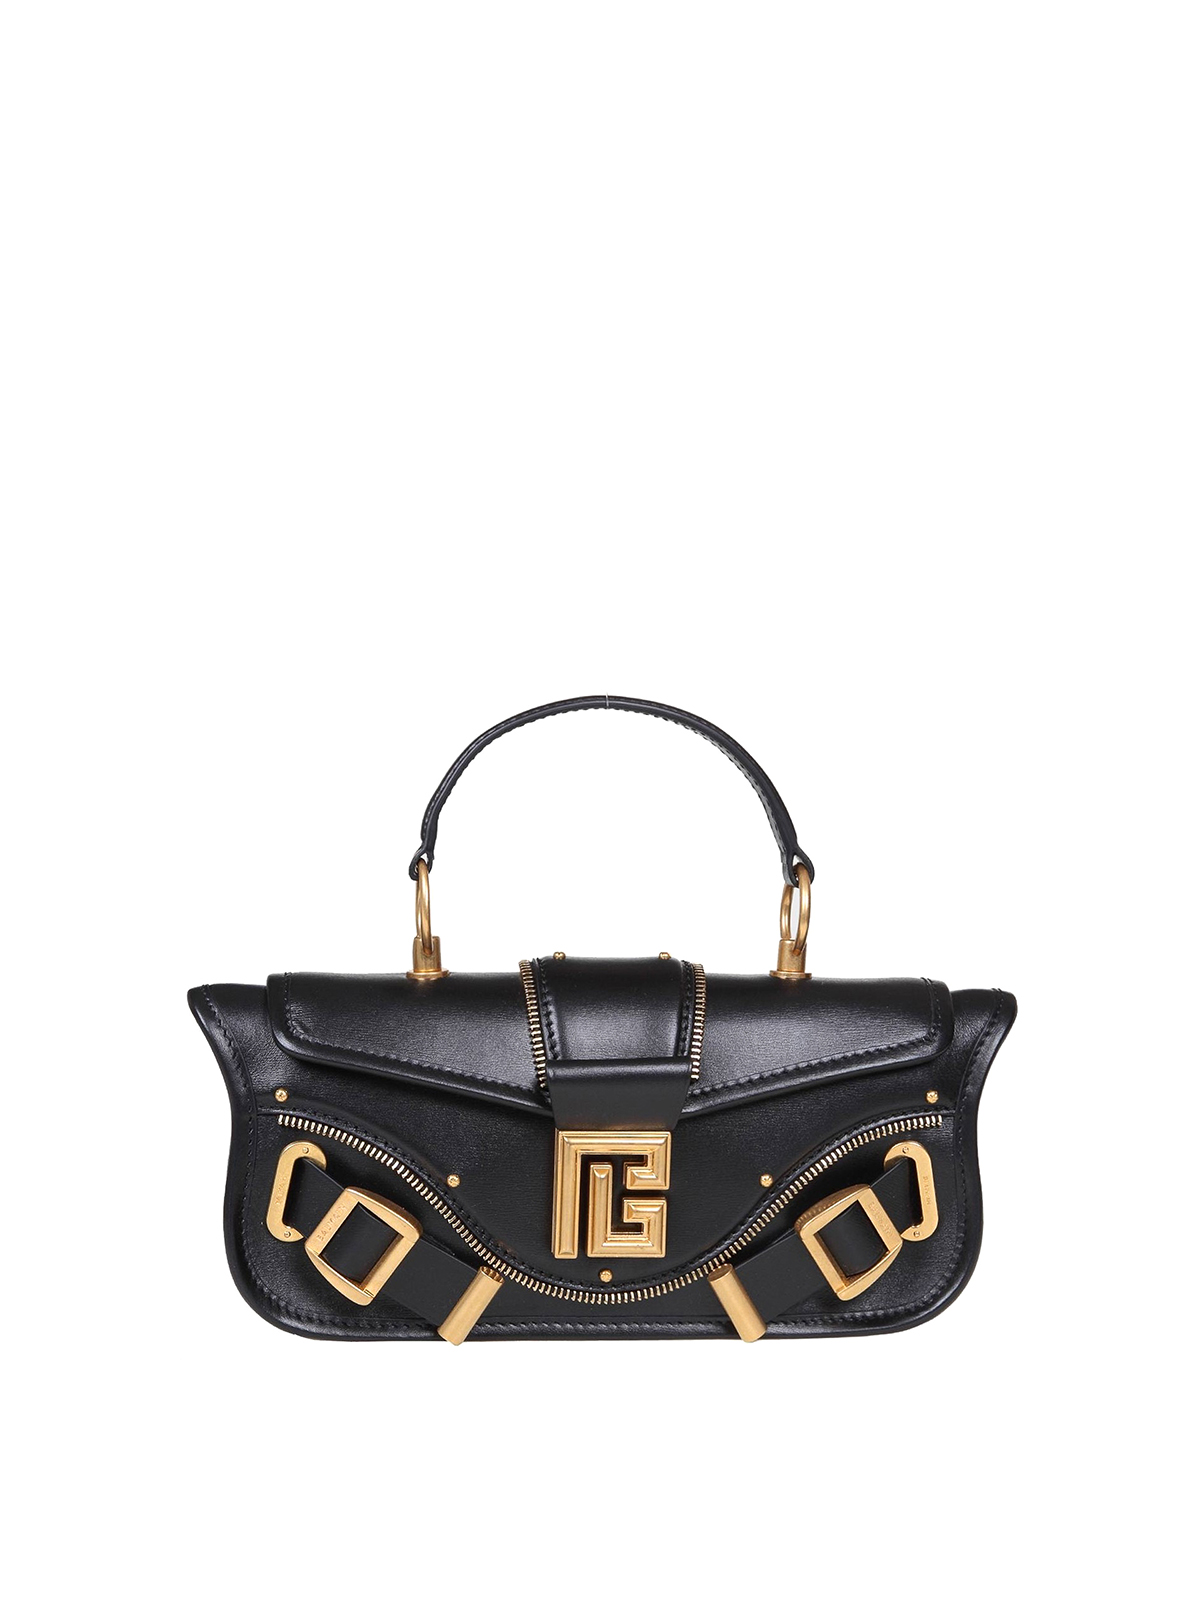 Balmain Leather Bag With Strap And Zip Details In Black